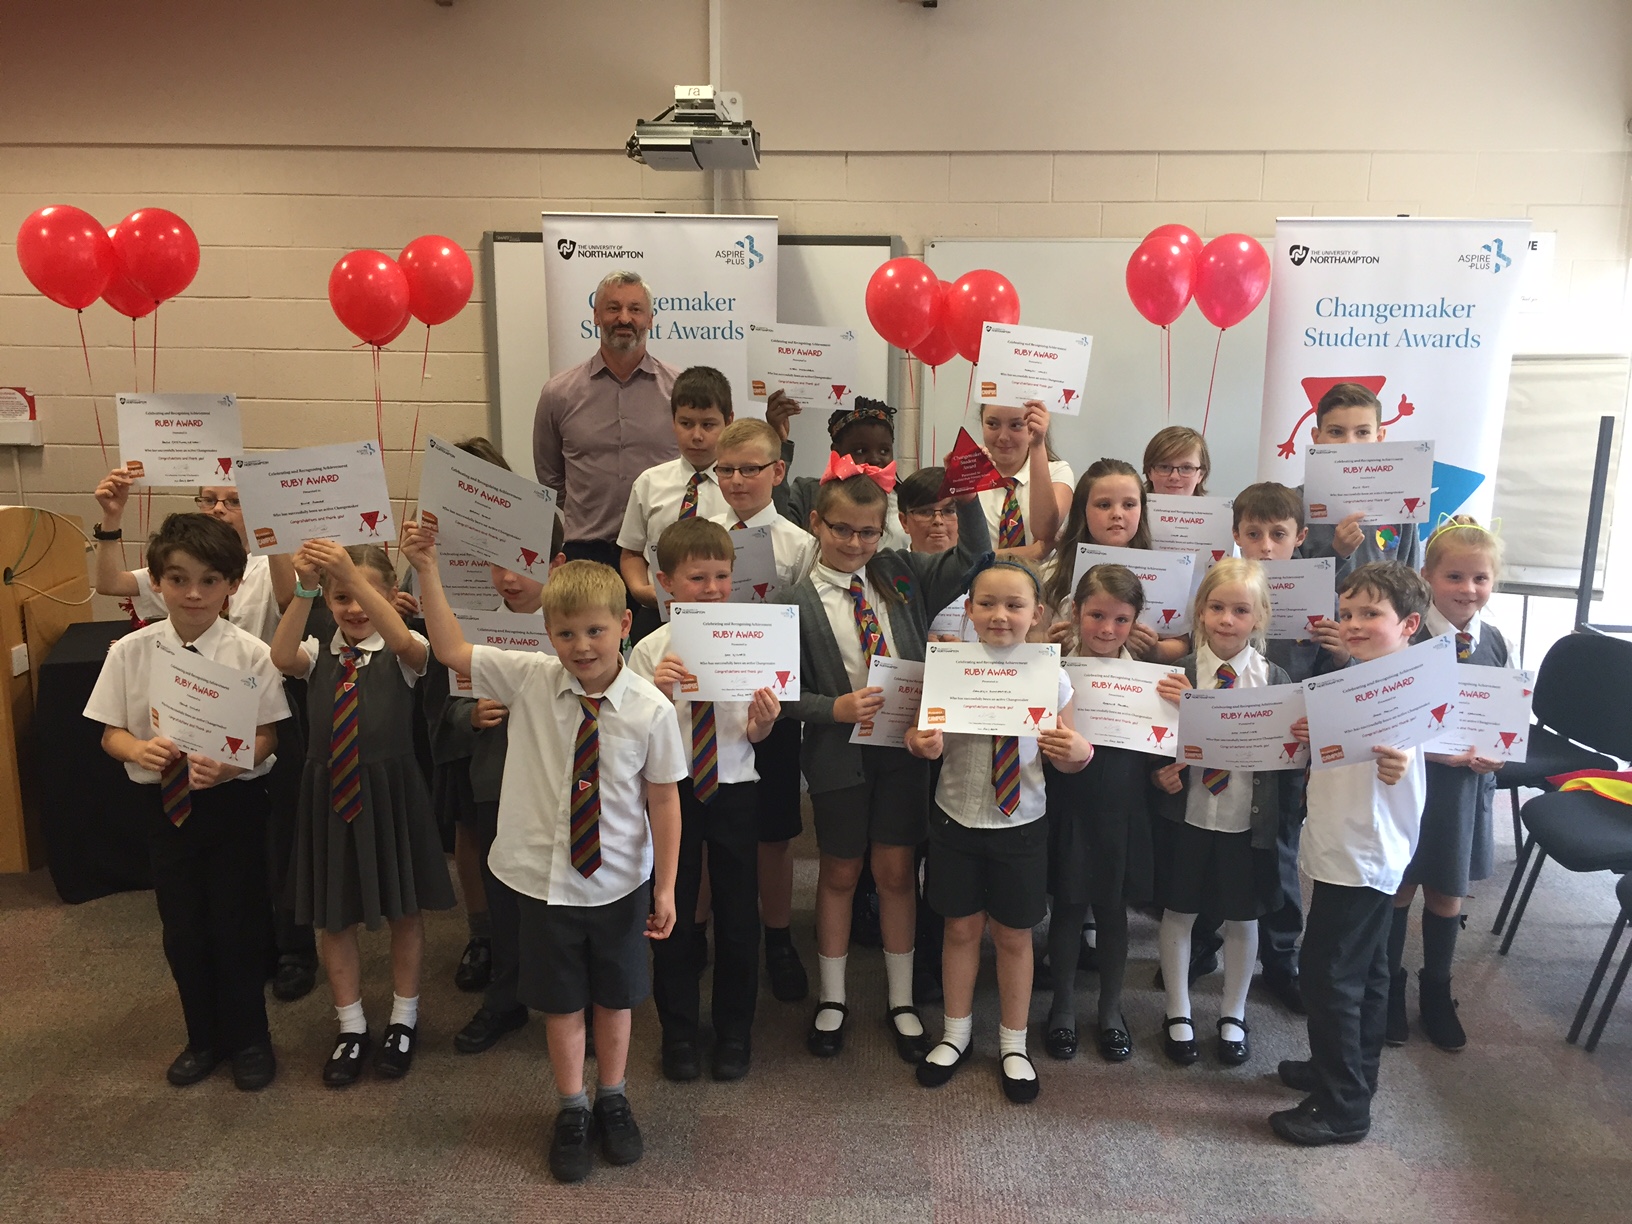 The children with their certificates